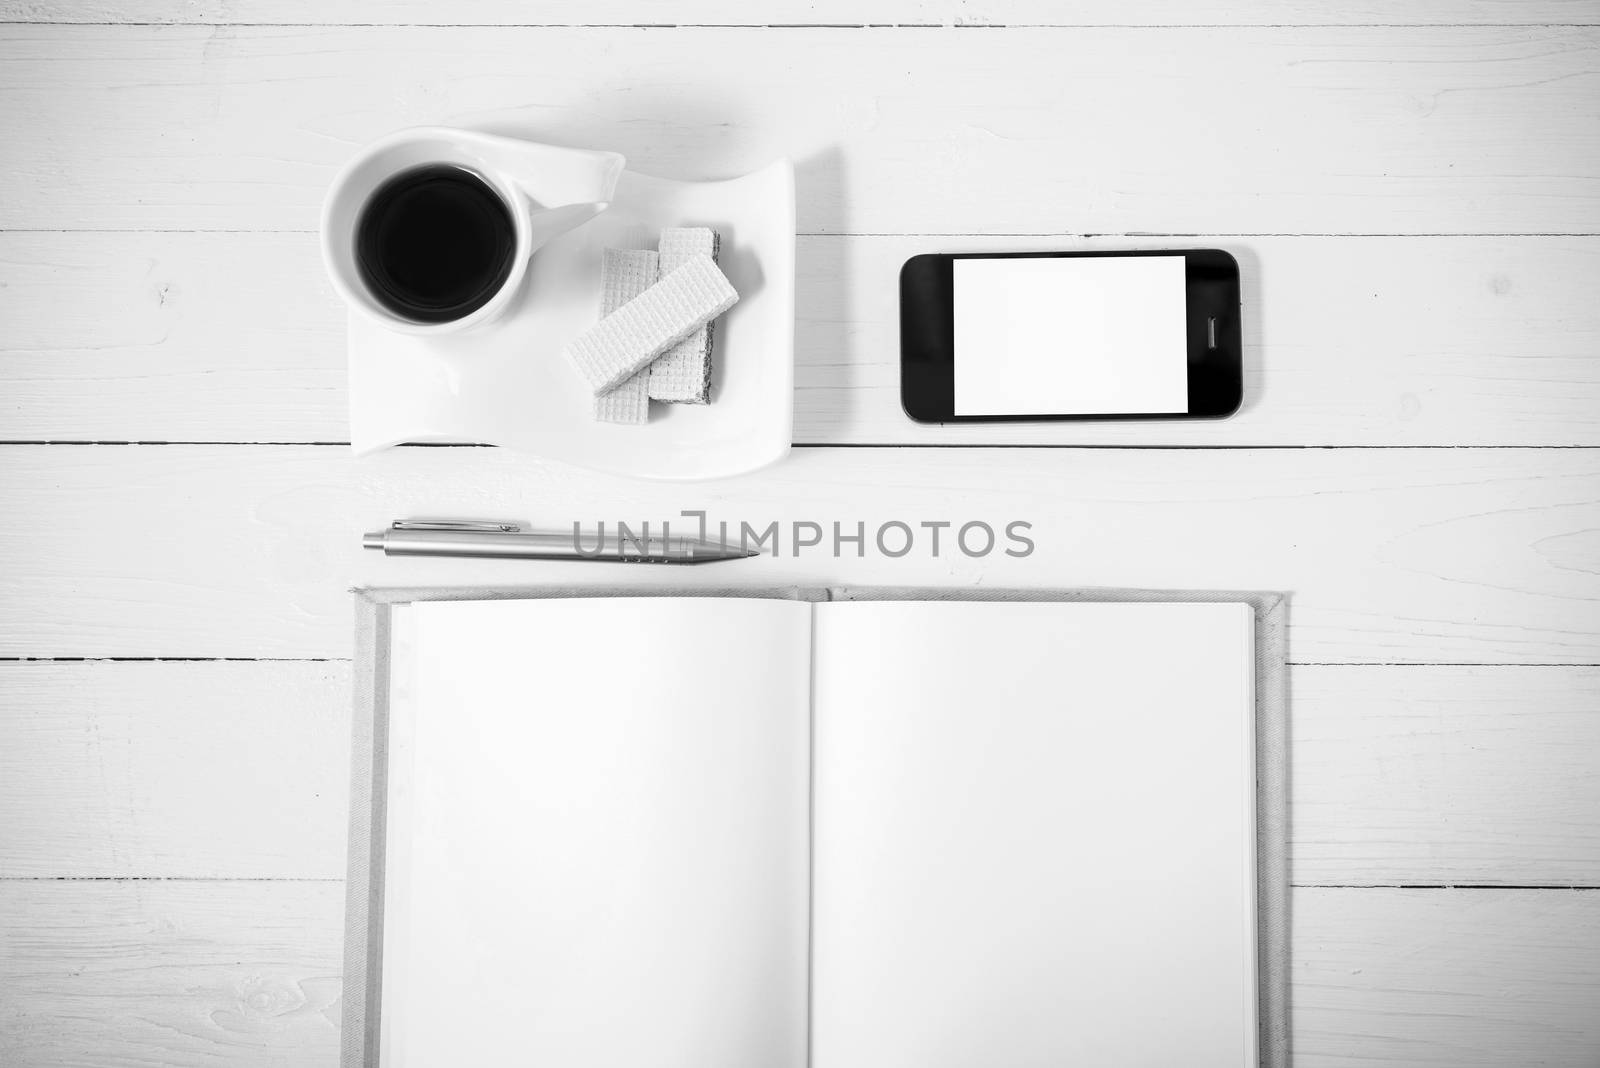 coffee cup with wafer,phone,notebook on white wood background black and white color